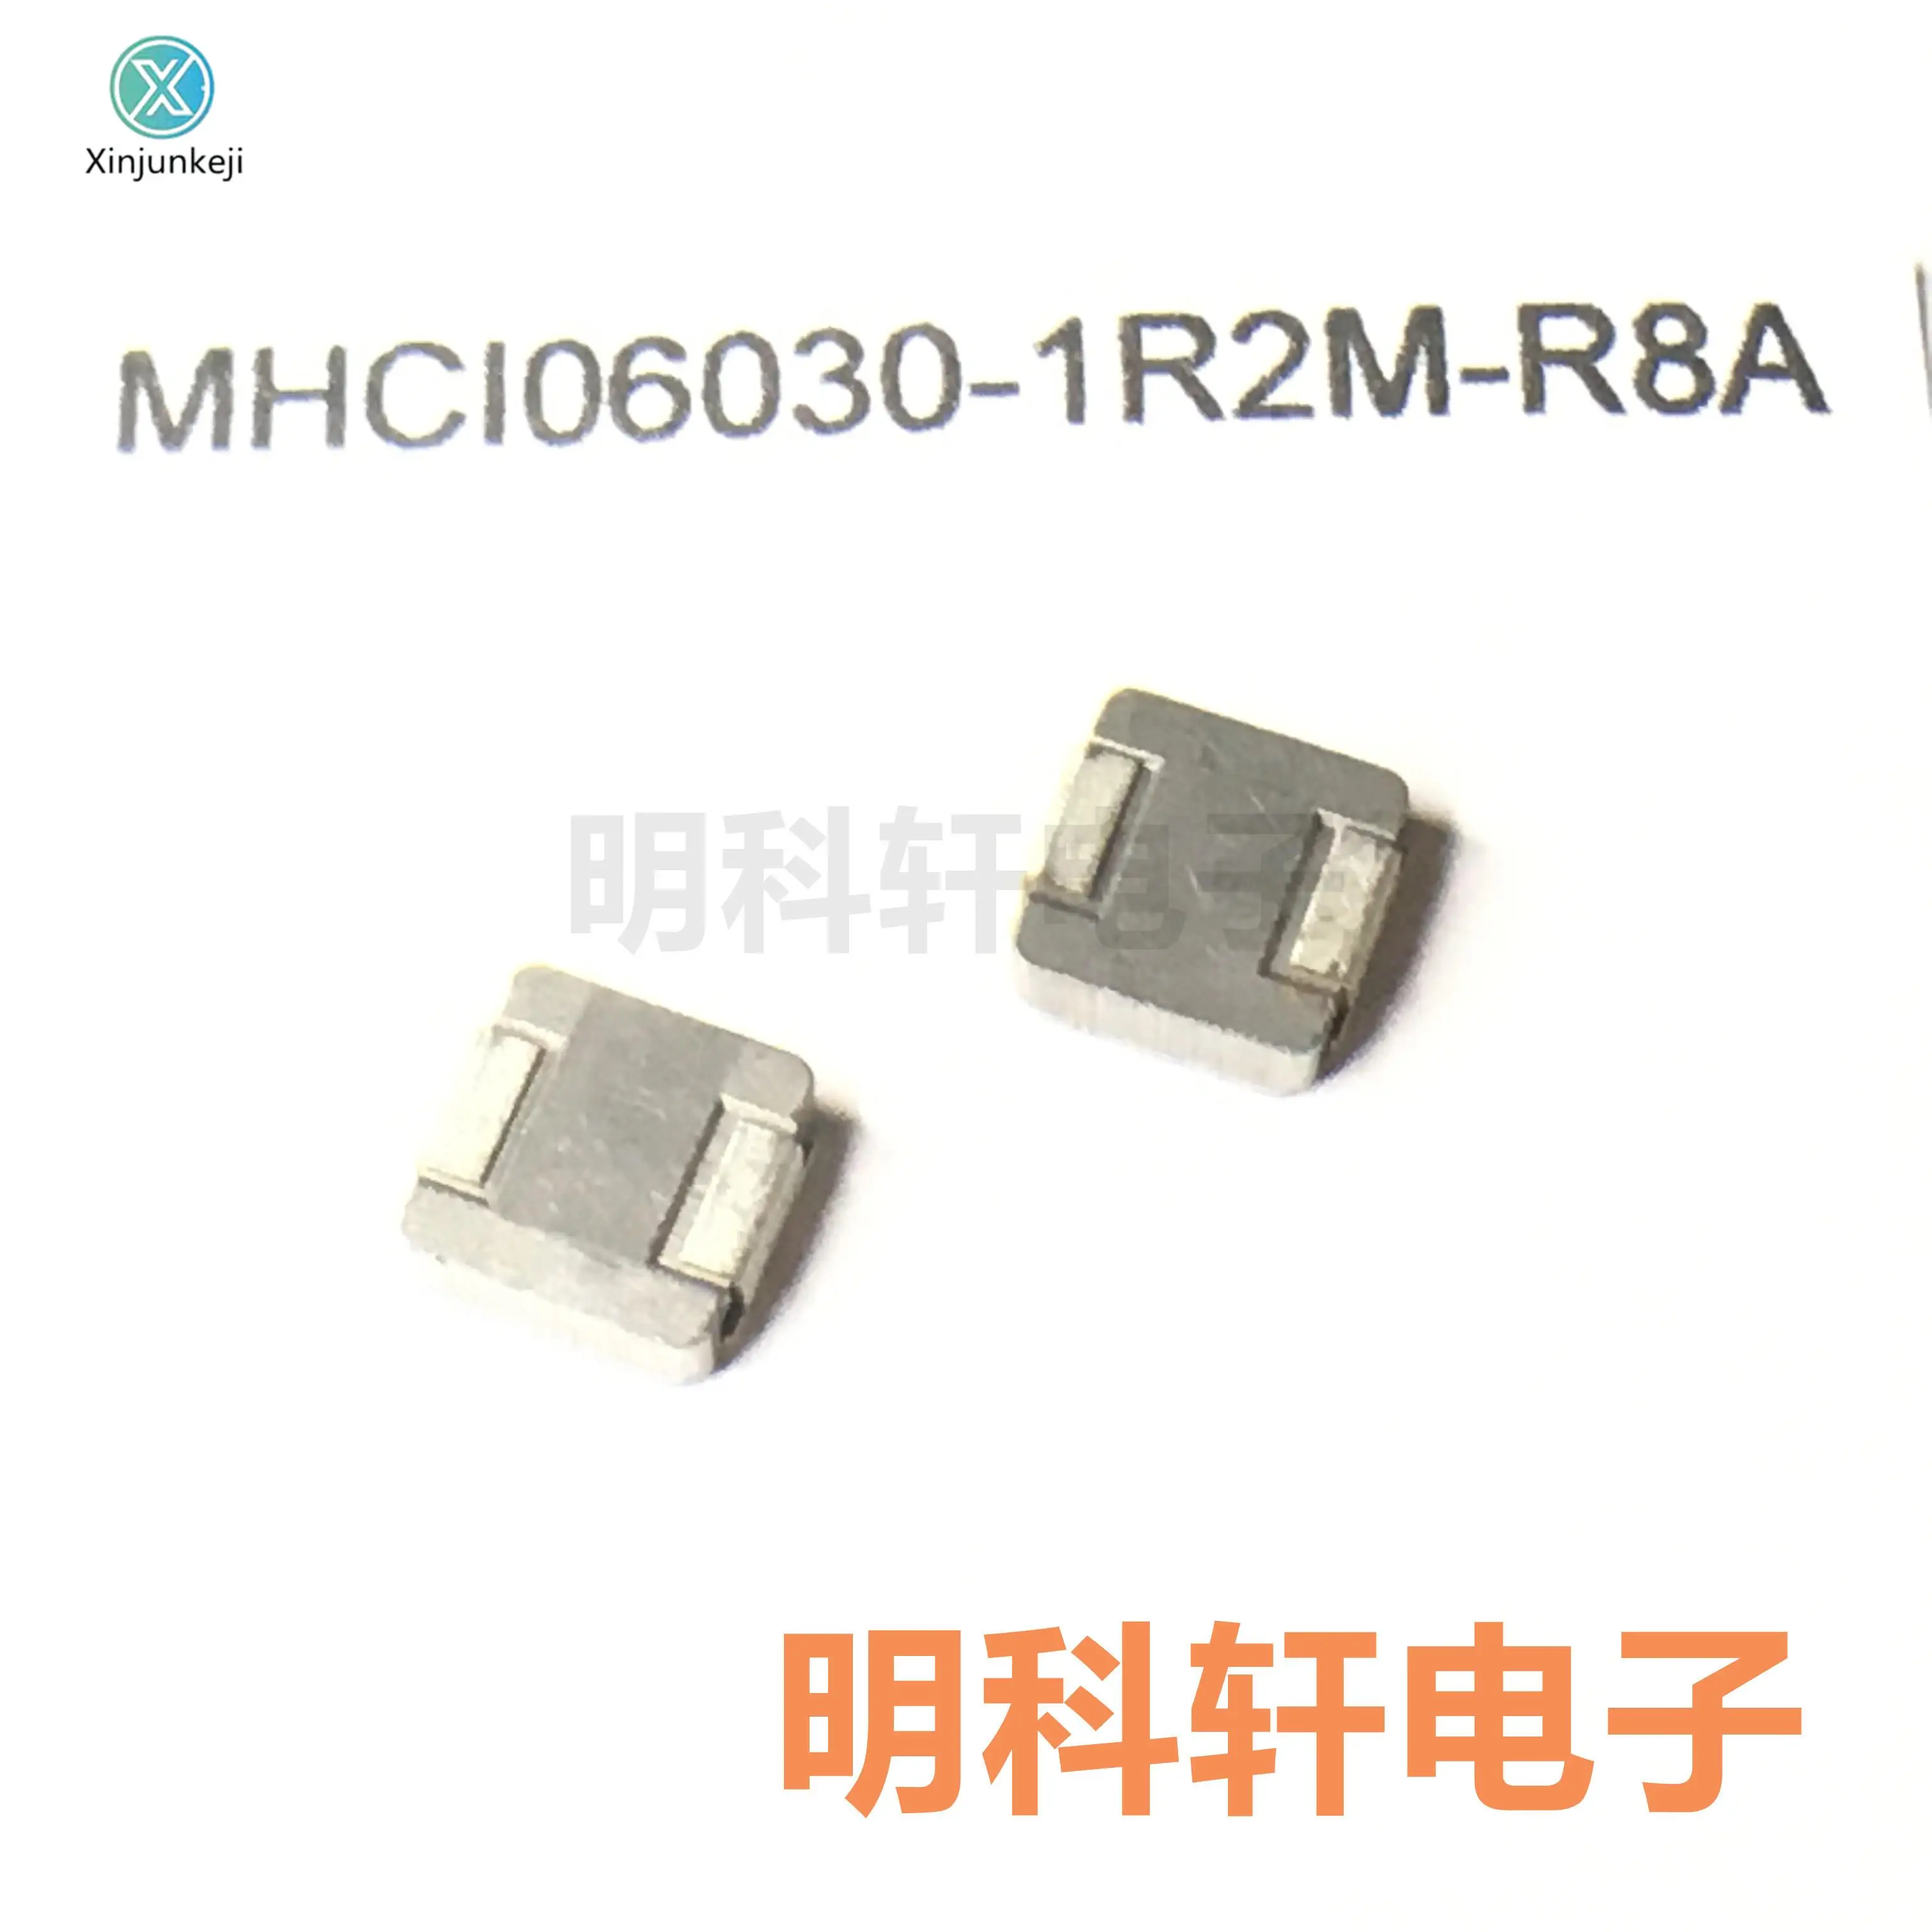 

10pcs orginal new MHCI06030-1R2M-R8A SMD integrated inductor 1.2UH 7*7*3